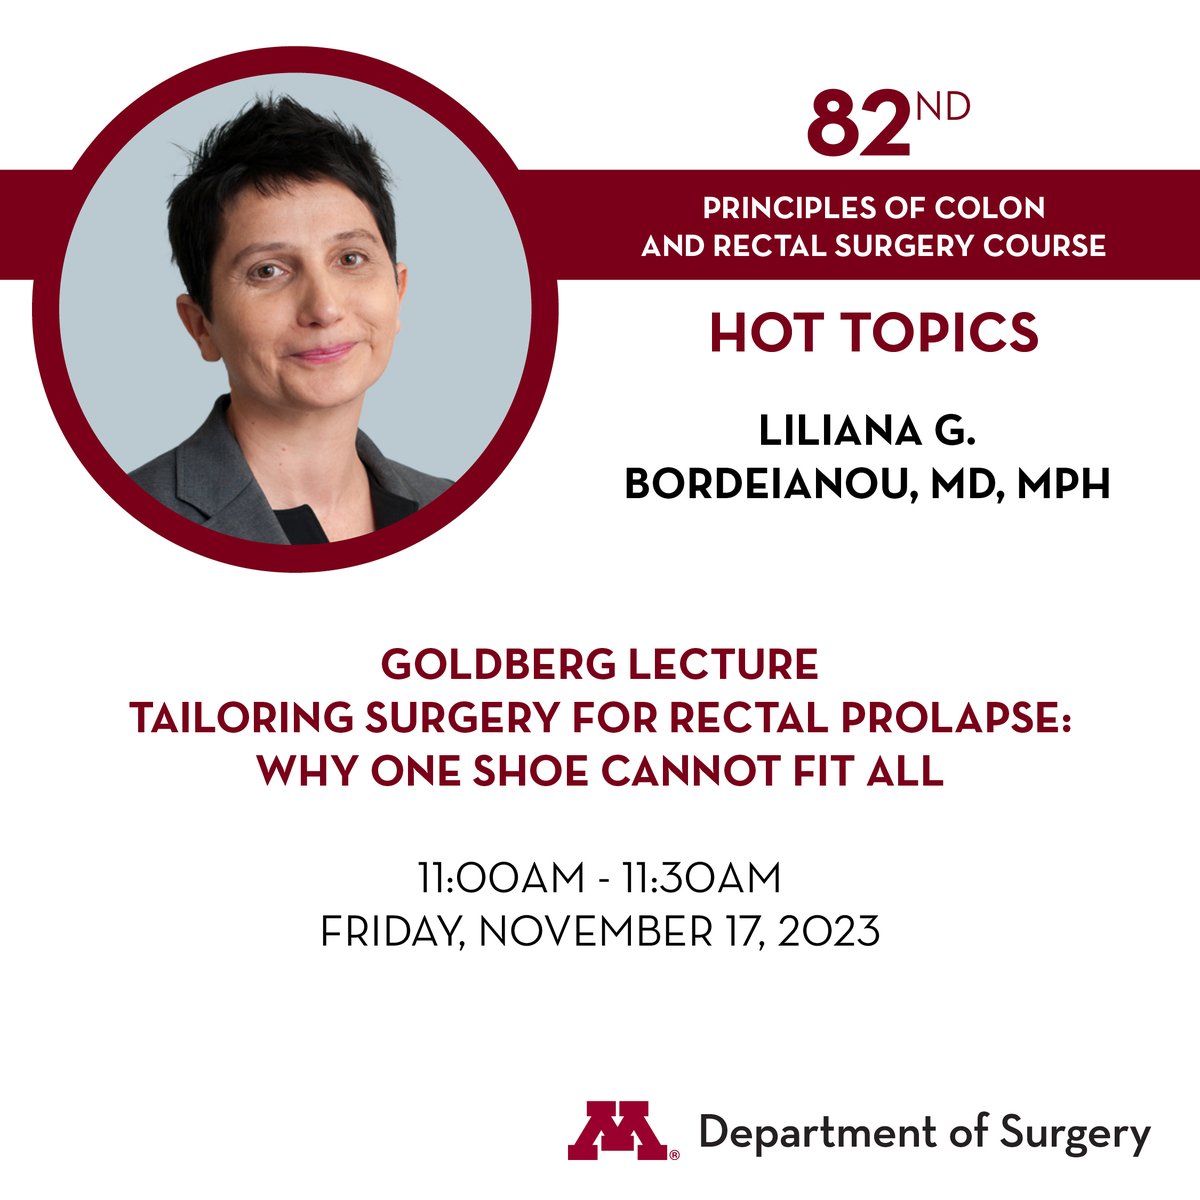 You won't want to miss this year's Goldberg and Frykman Lectures on Nov. 17 & 18! Register today for the 82nd Principles of Colon and Rectal Surgery Course: Hot Topics ⬇️ z.umn.edu/colonandrectal @MNCRSurgery | #UMNSurgery